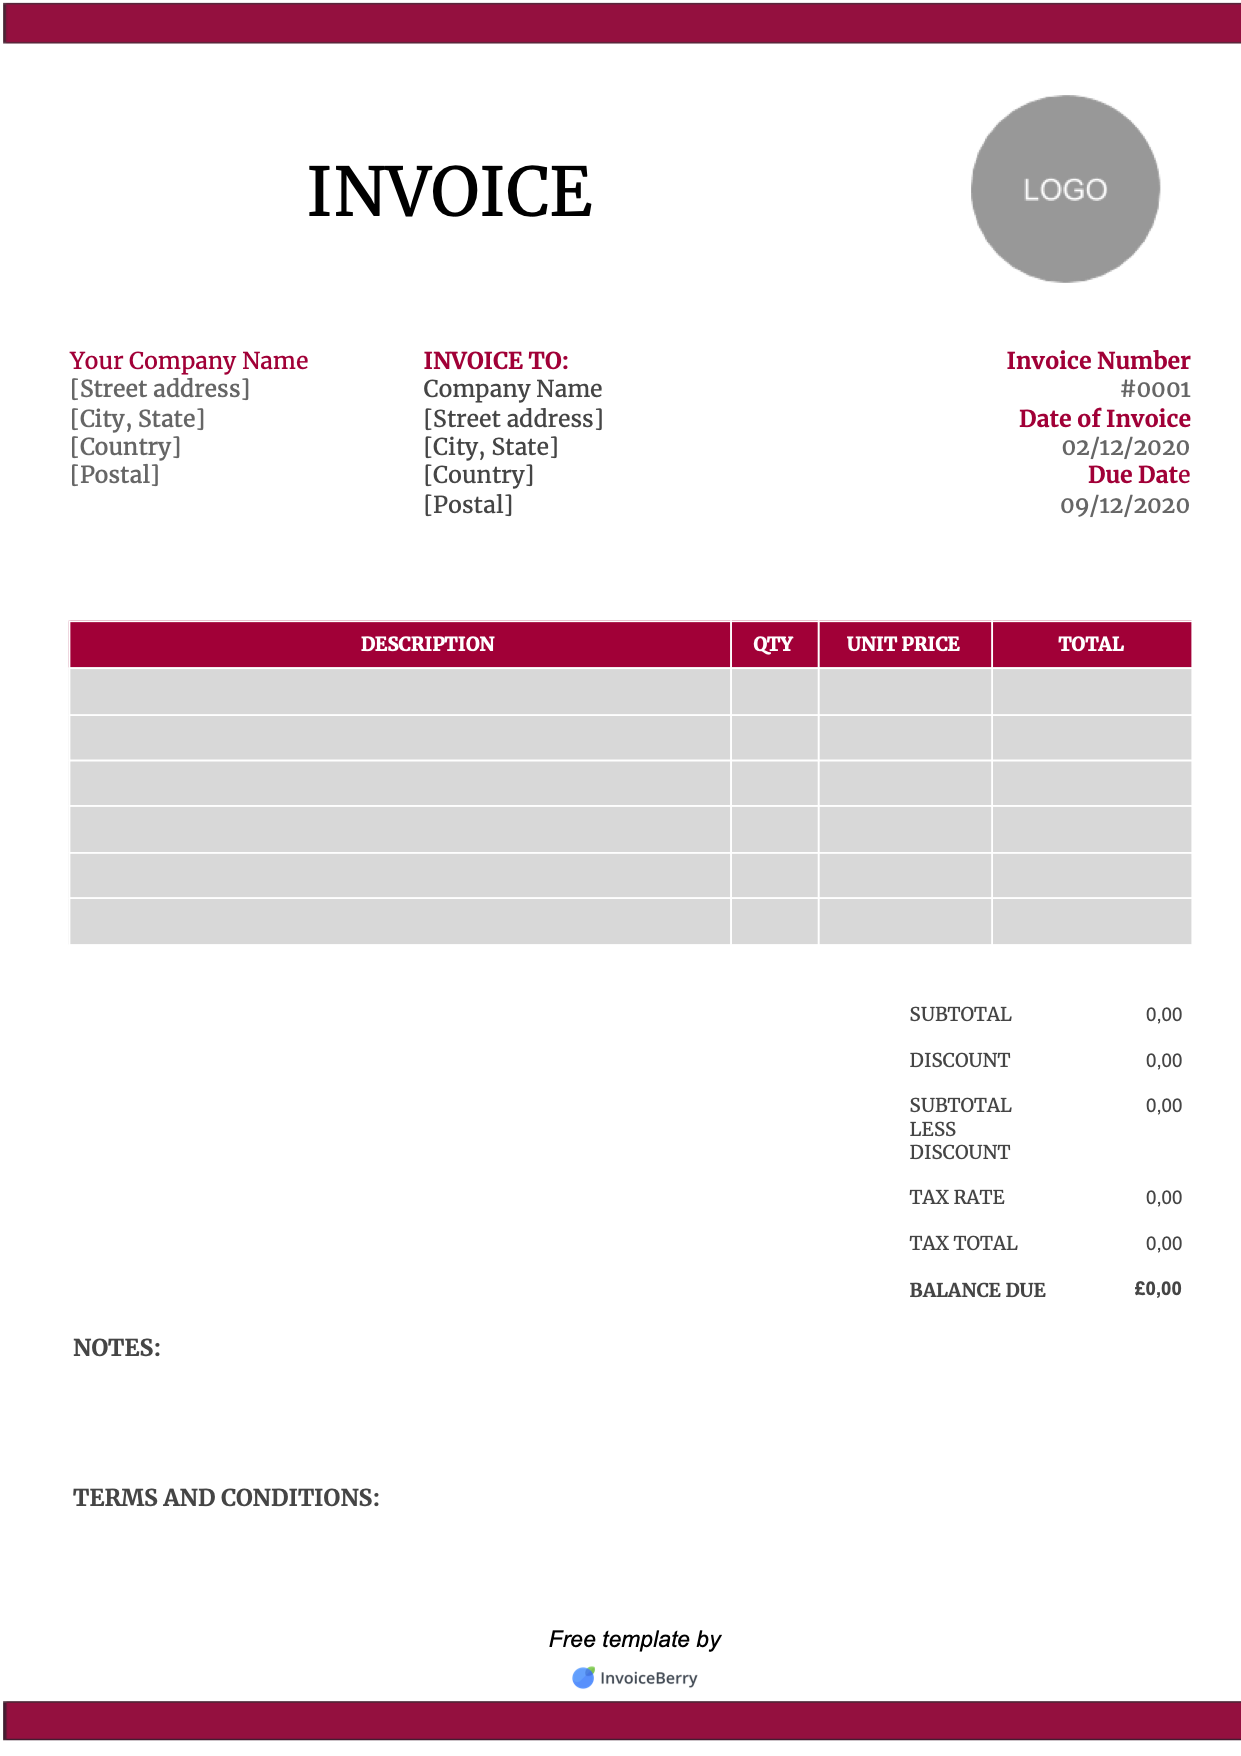 Free UK Invoice Template Sample #22 Download  InvoiceBerry Within Invoice Template Uk Doc